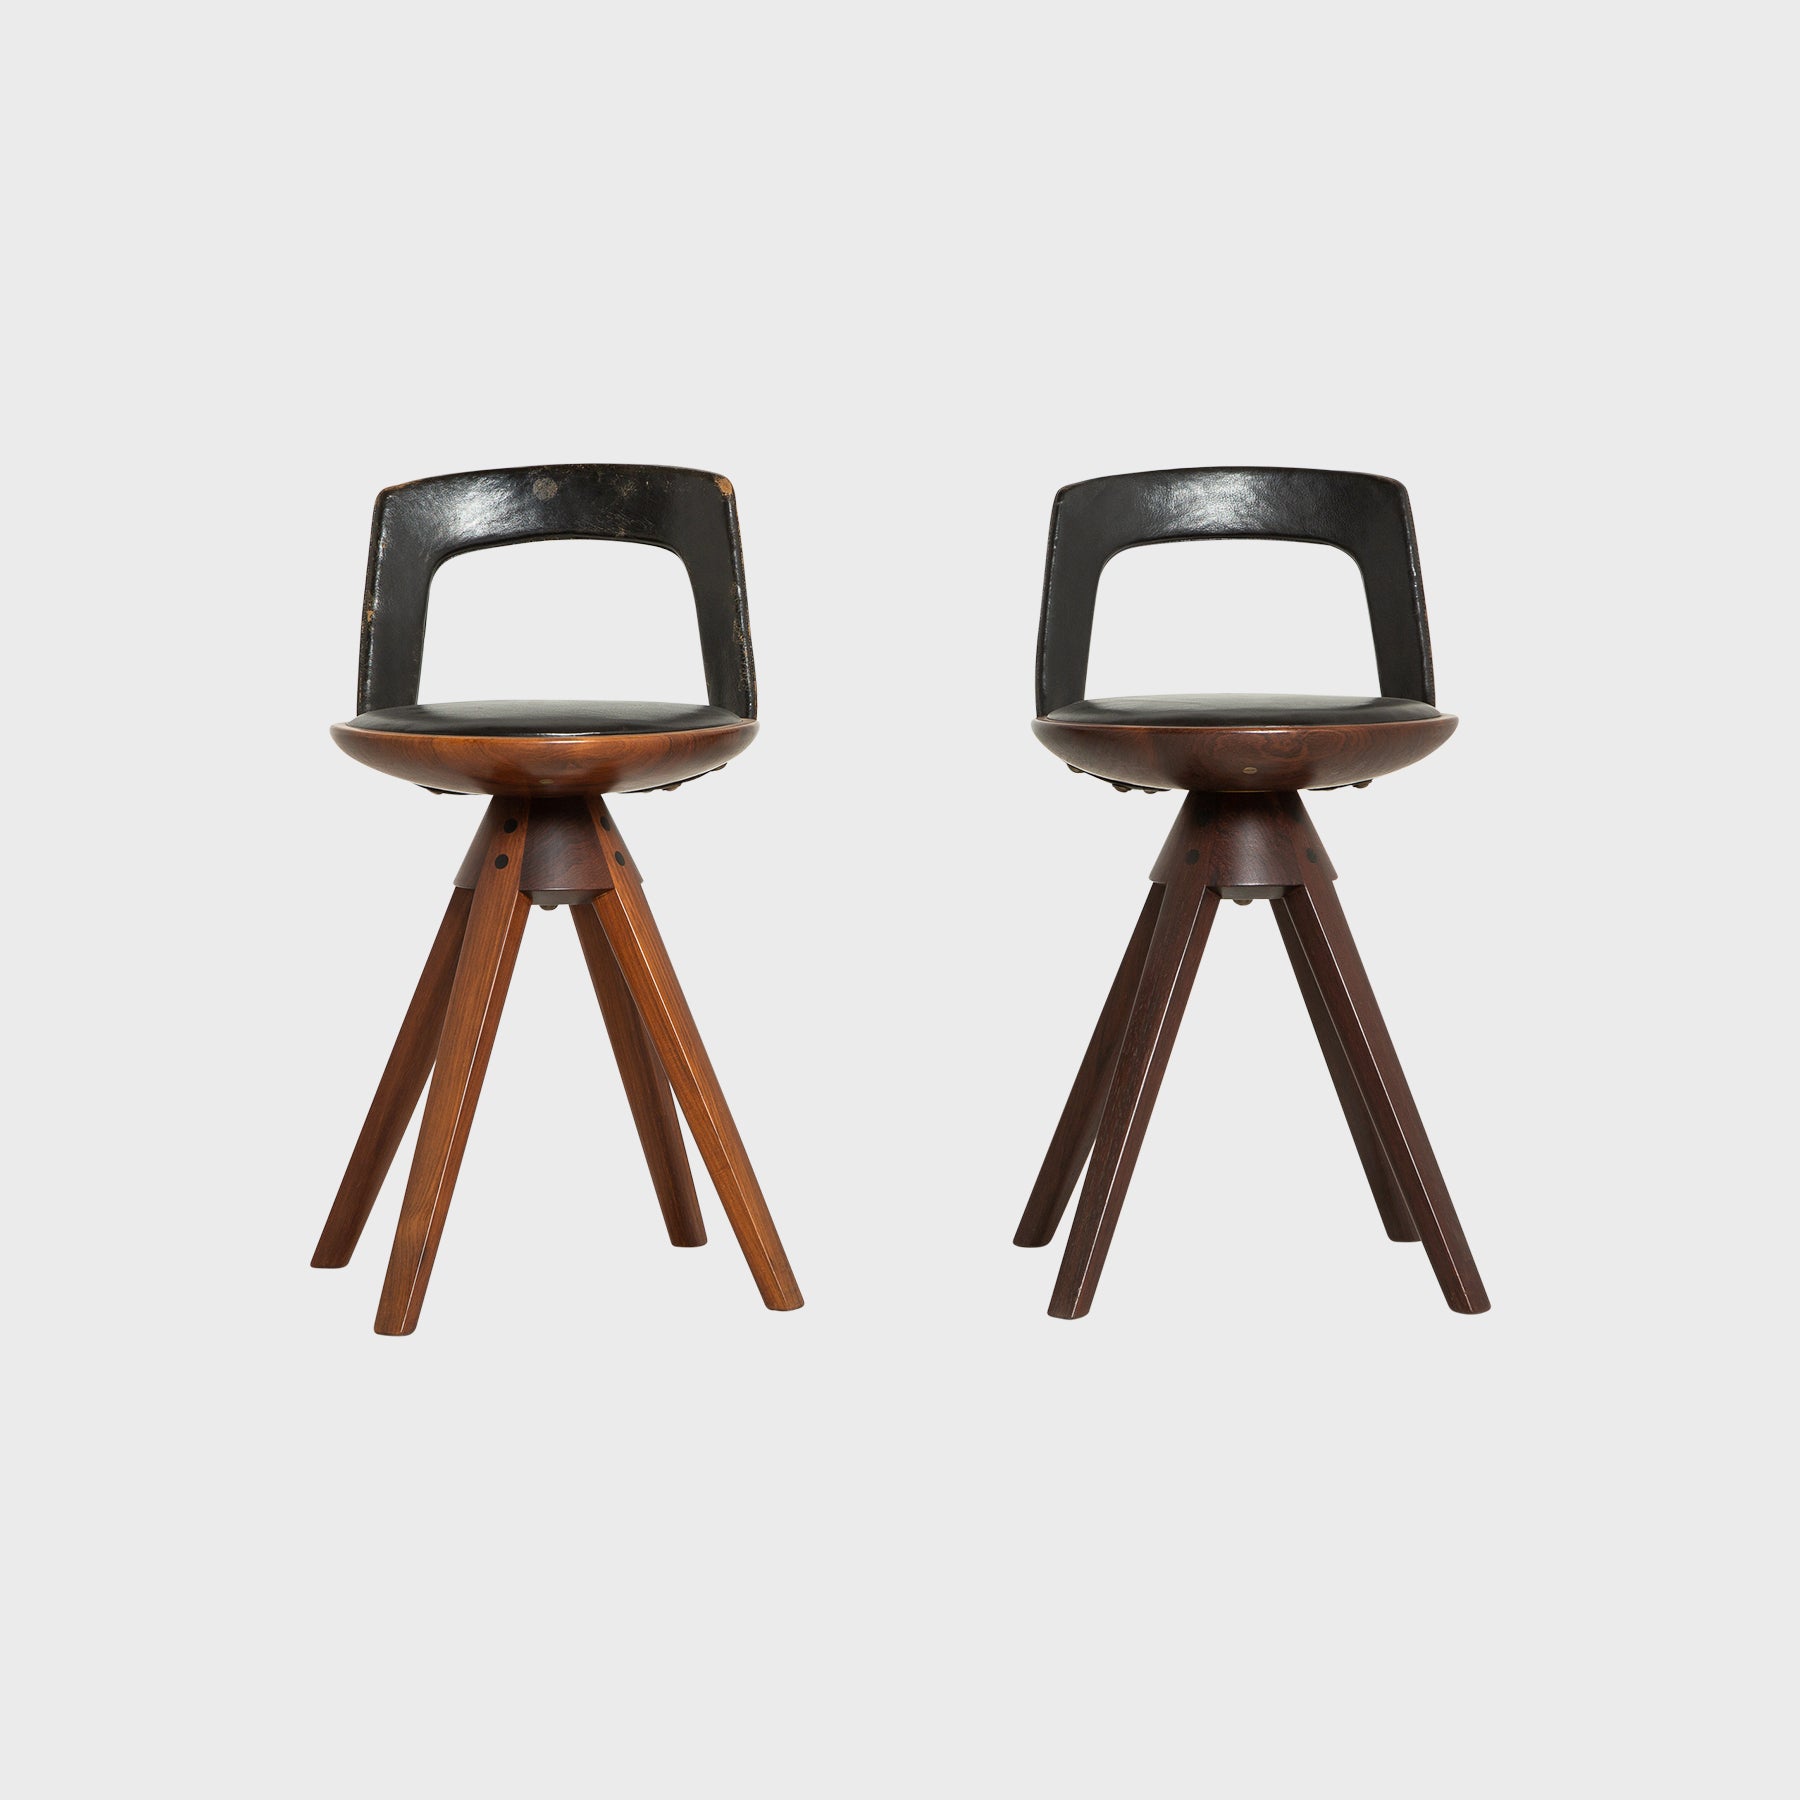 MAXFIELD PRIVATE COLLECTION | PAIR OF 1957 KINDT-LARSEN STOOLS